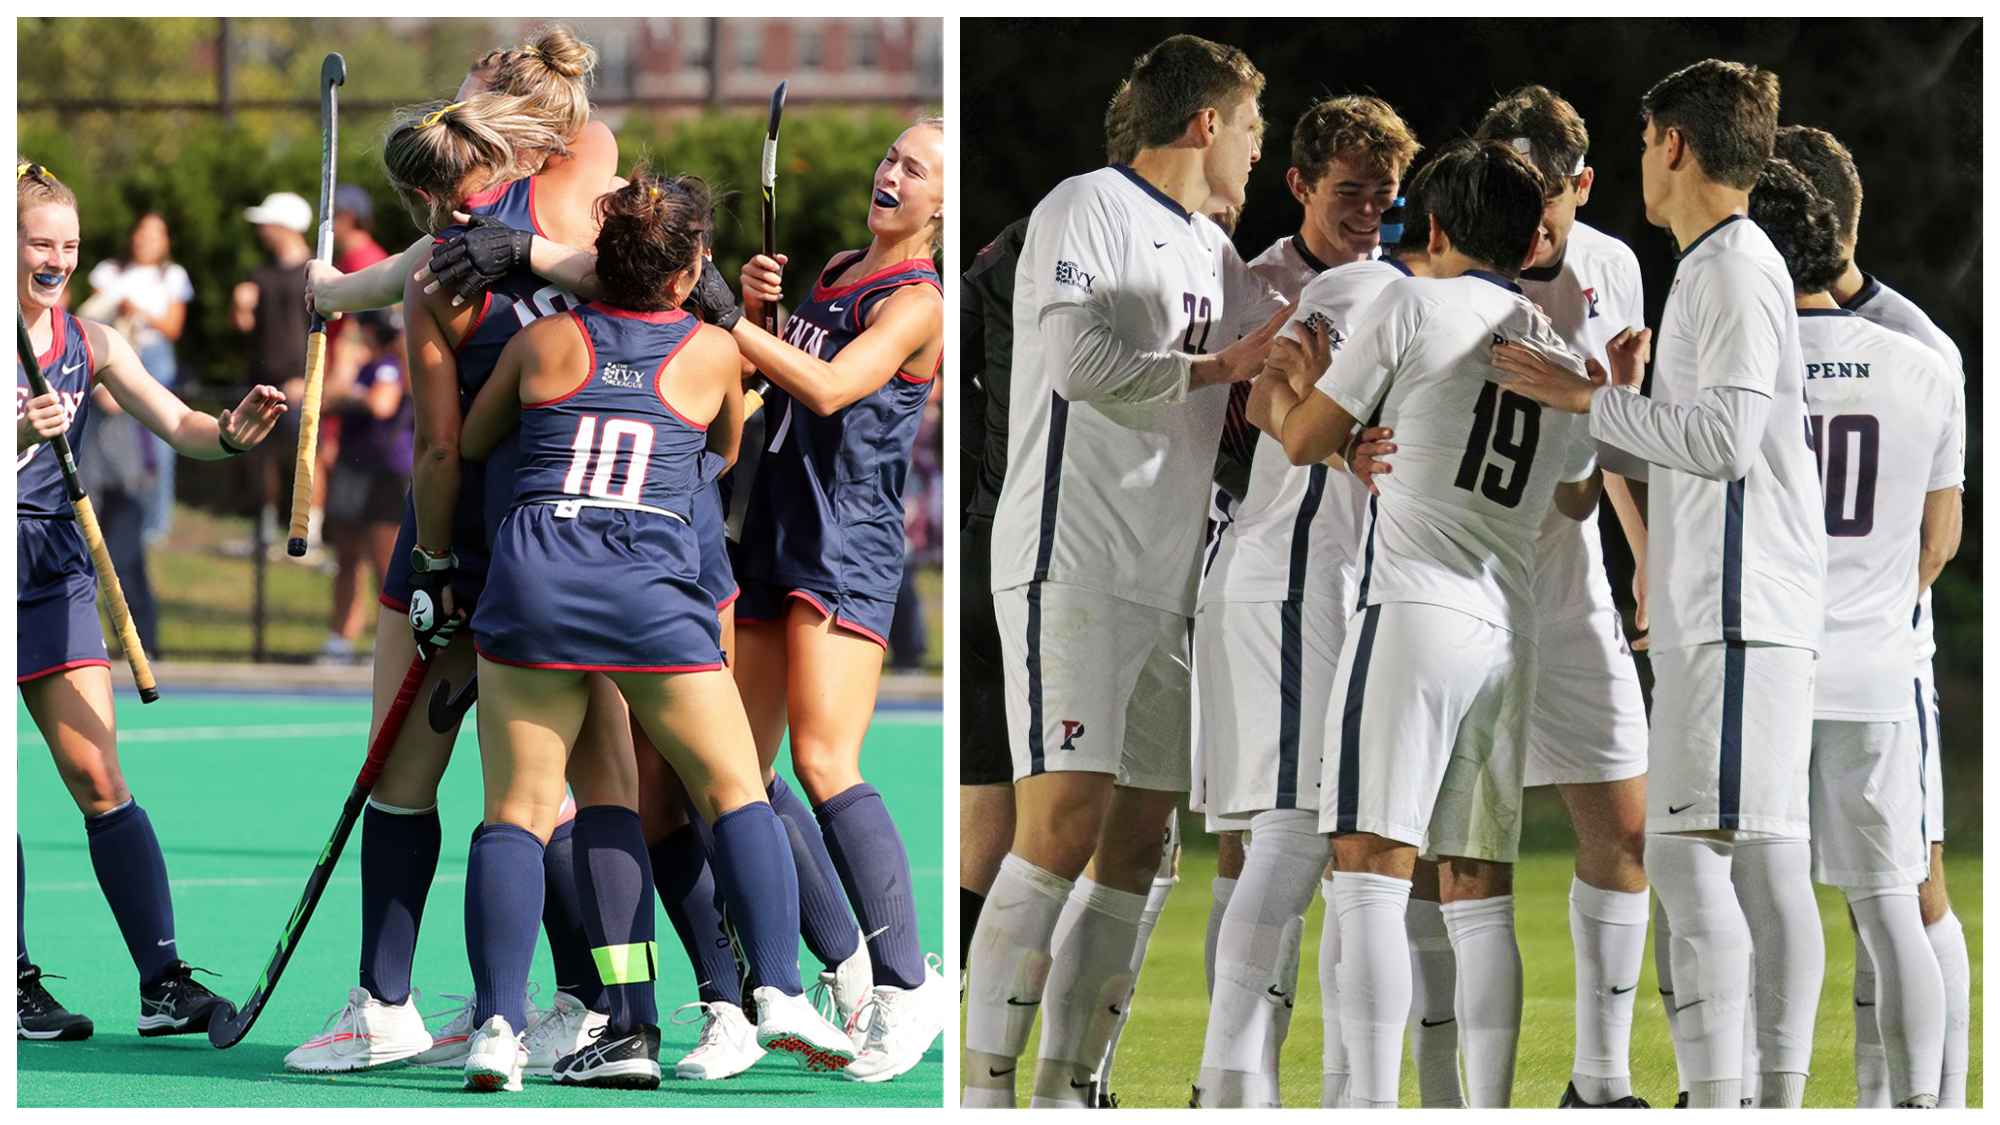 At left, field hockey players hug and celebrate; at right, men's soccer players chat in a huddle.